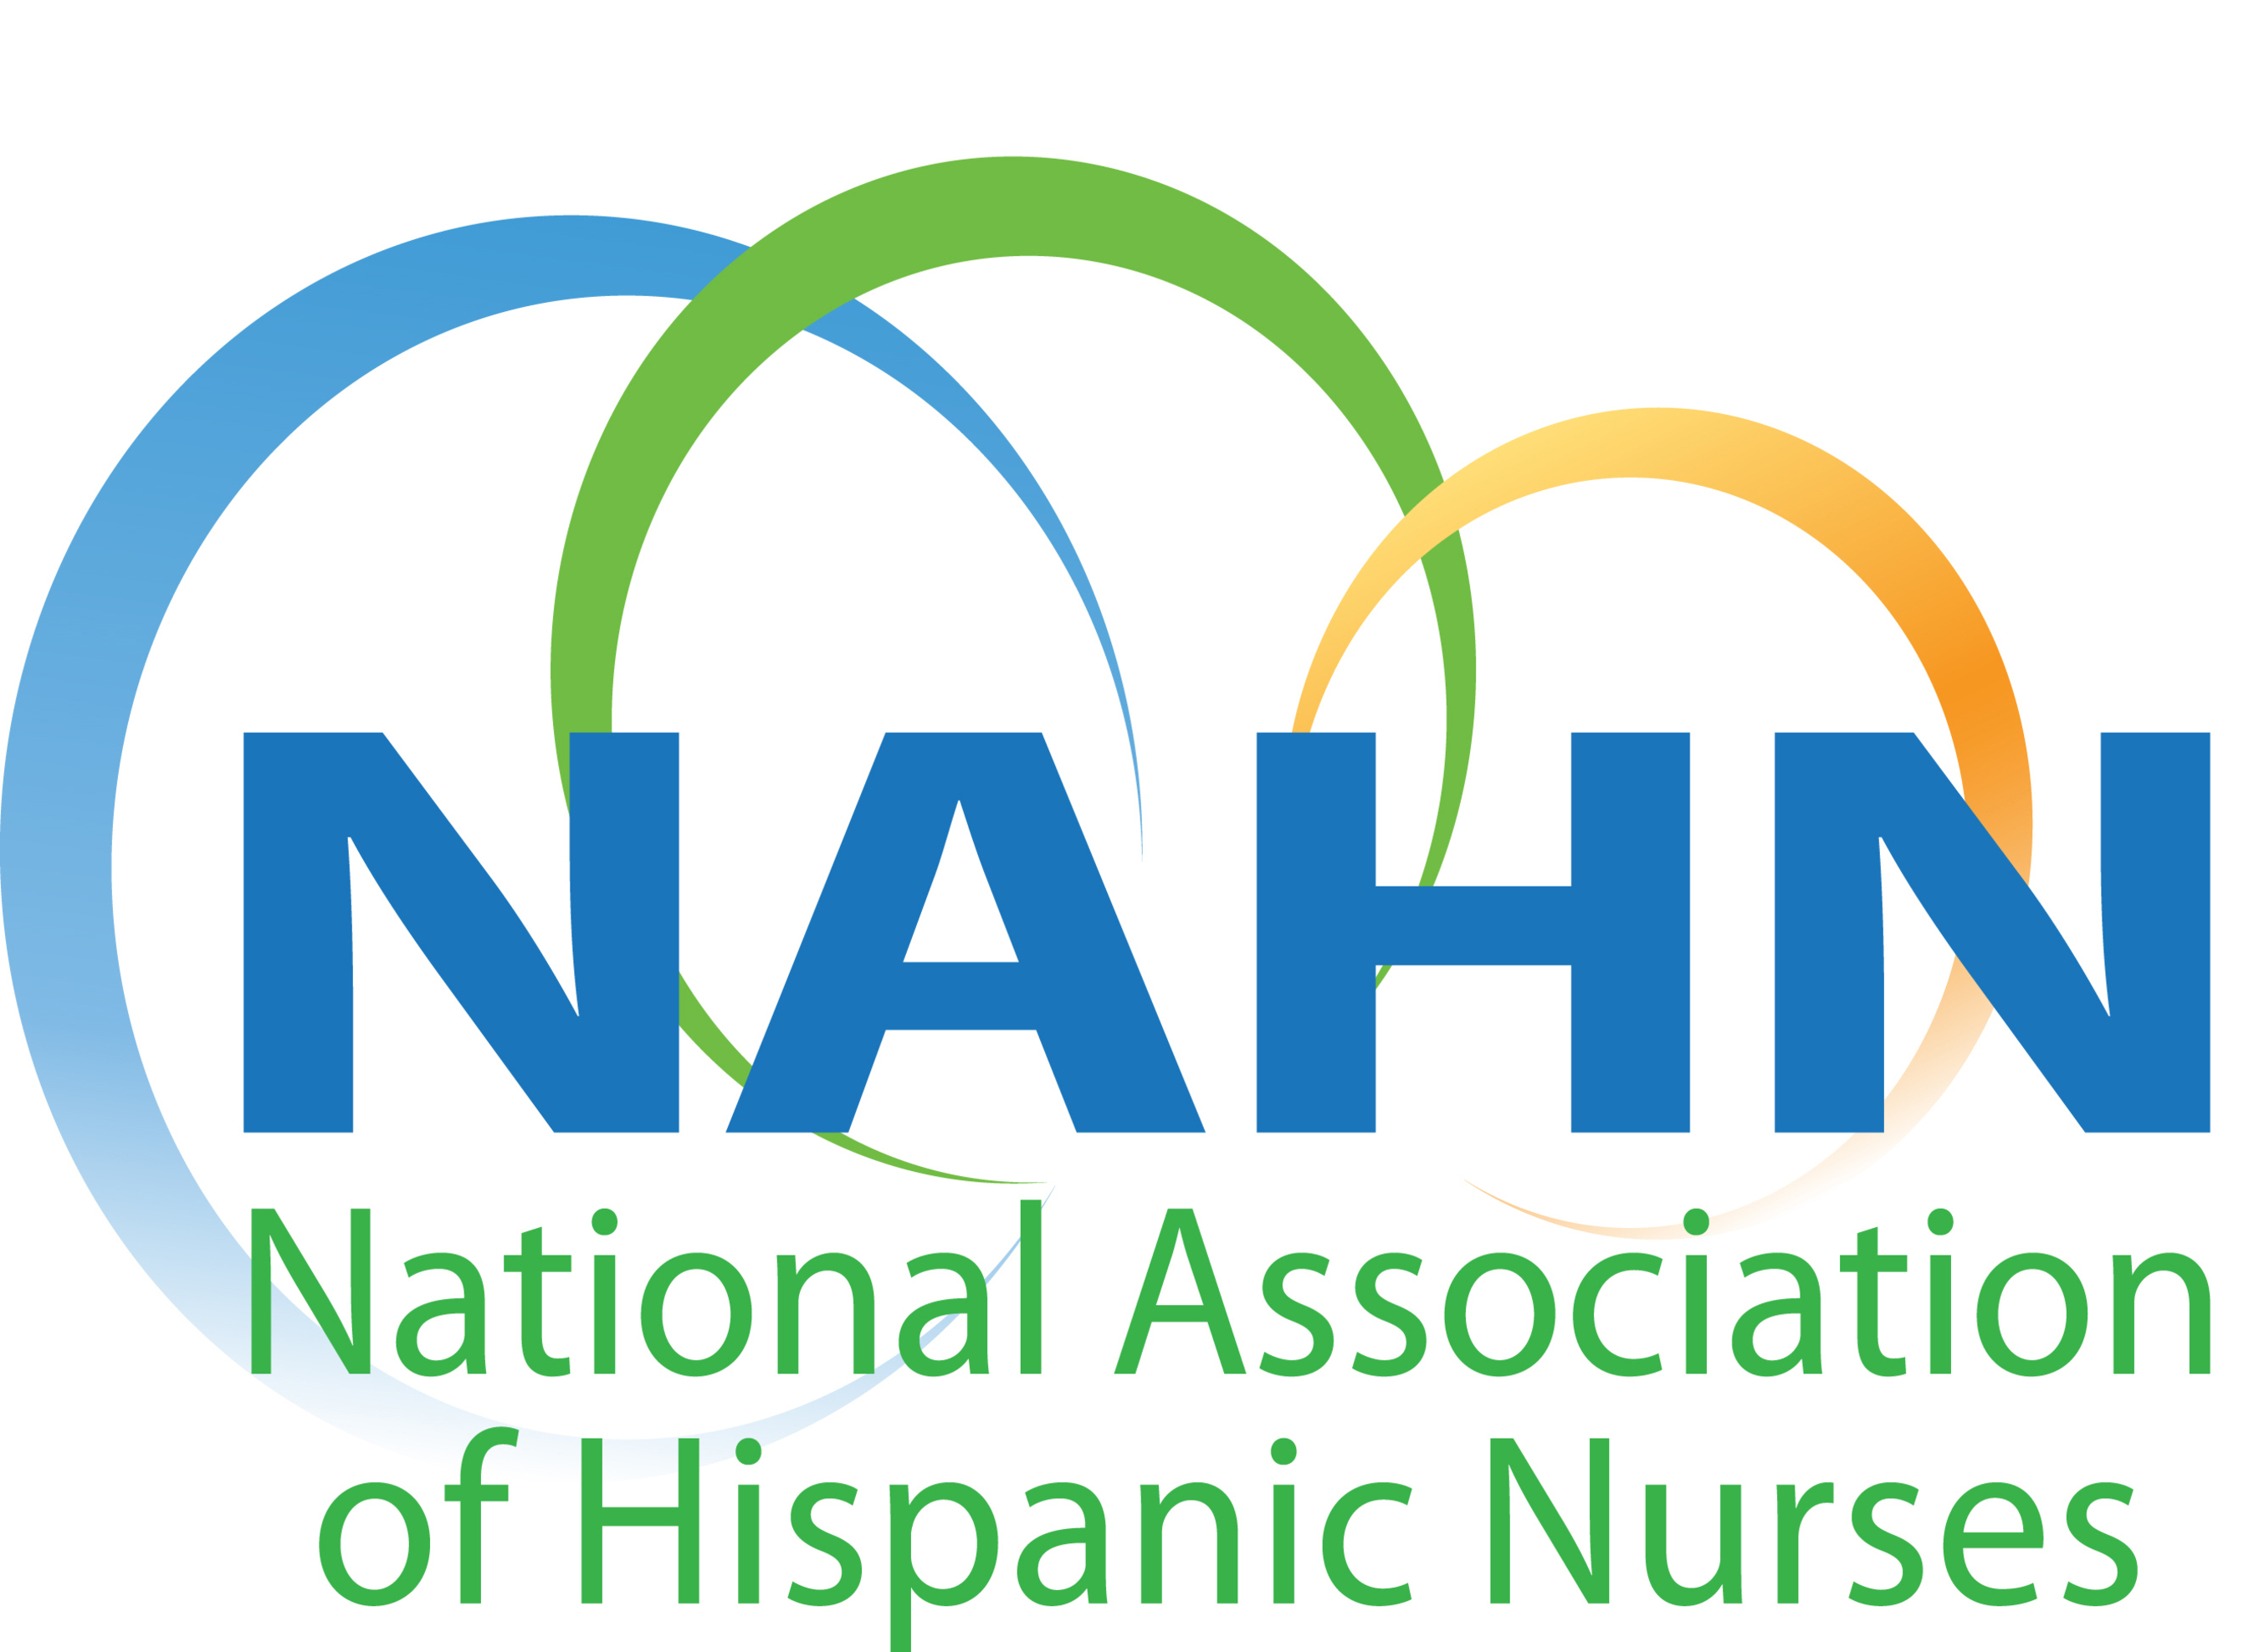 The National Association of Hispanic Nurses and Transitions Optical are partnering to promote eye health in Hispanic communities. Learn more at nahnnet.org/transitions_optical.html.  (PRNewsFoto/Transitions Optical, Inc.)